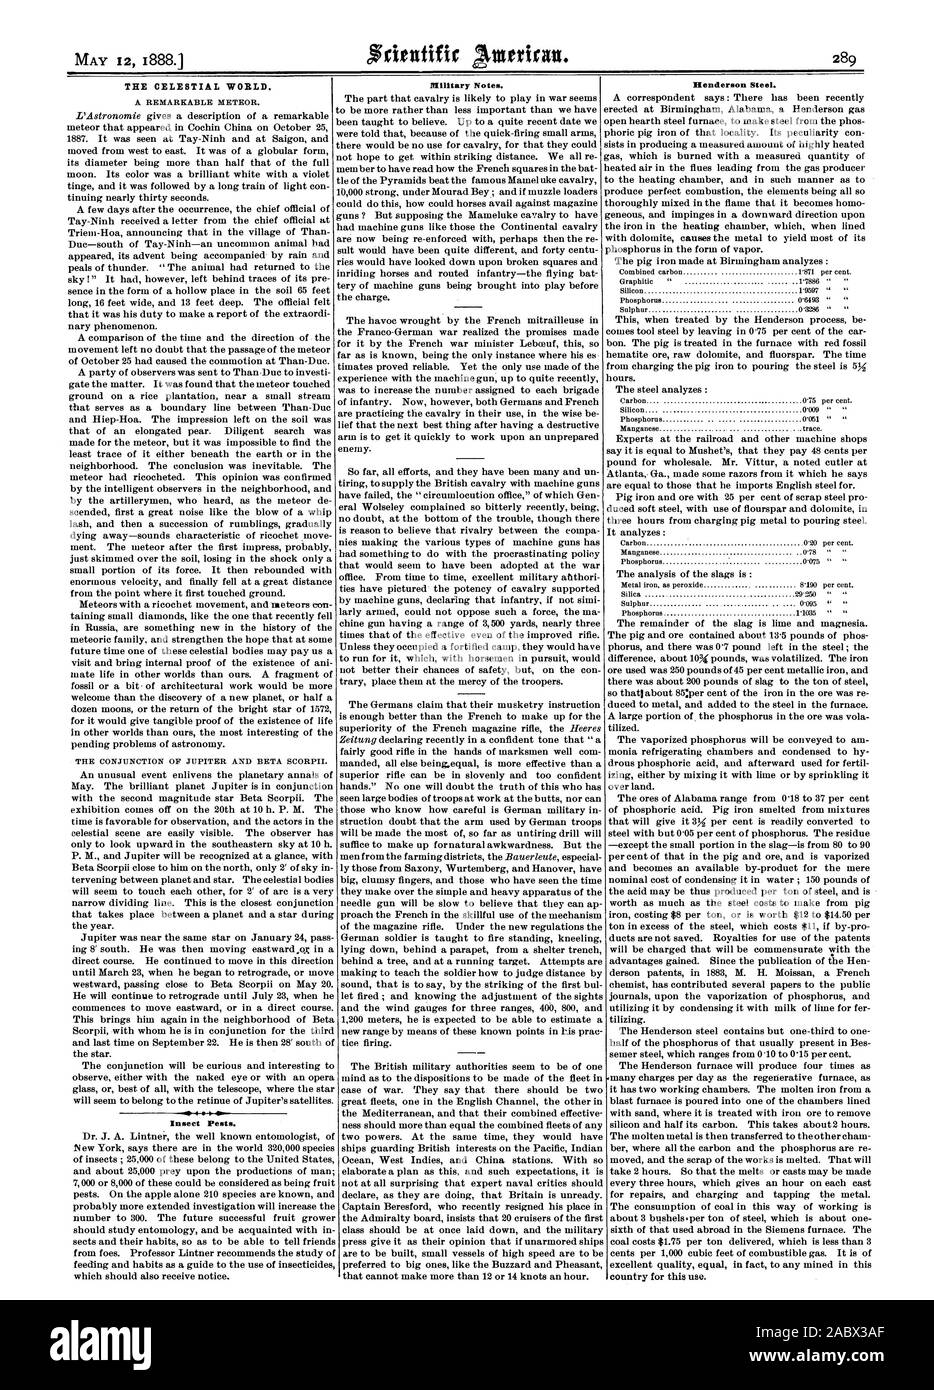 Insect Pests. Military Notes. Henderson Steel. THE CELESTIAL WORLD., scientific american, 1888-05-12 Stock Photo